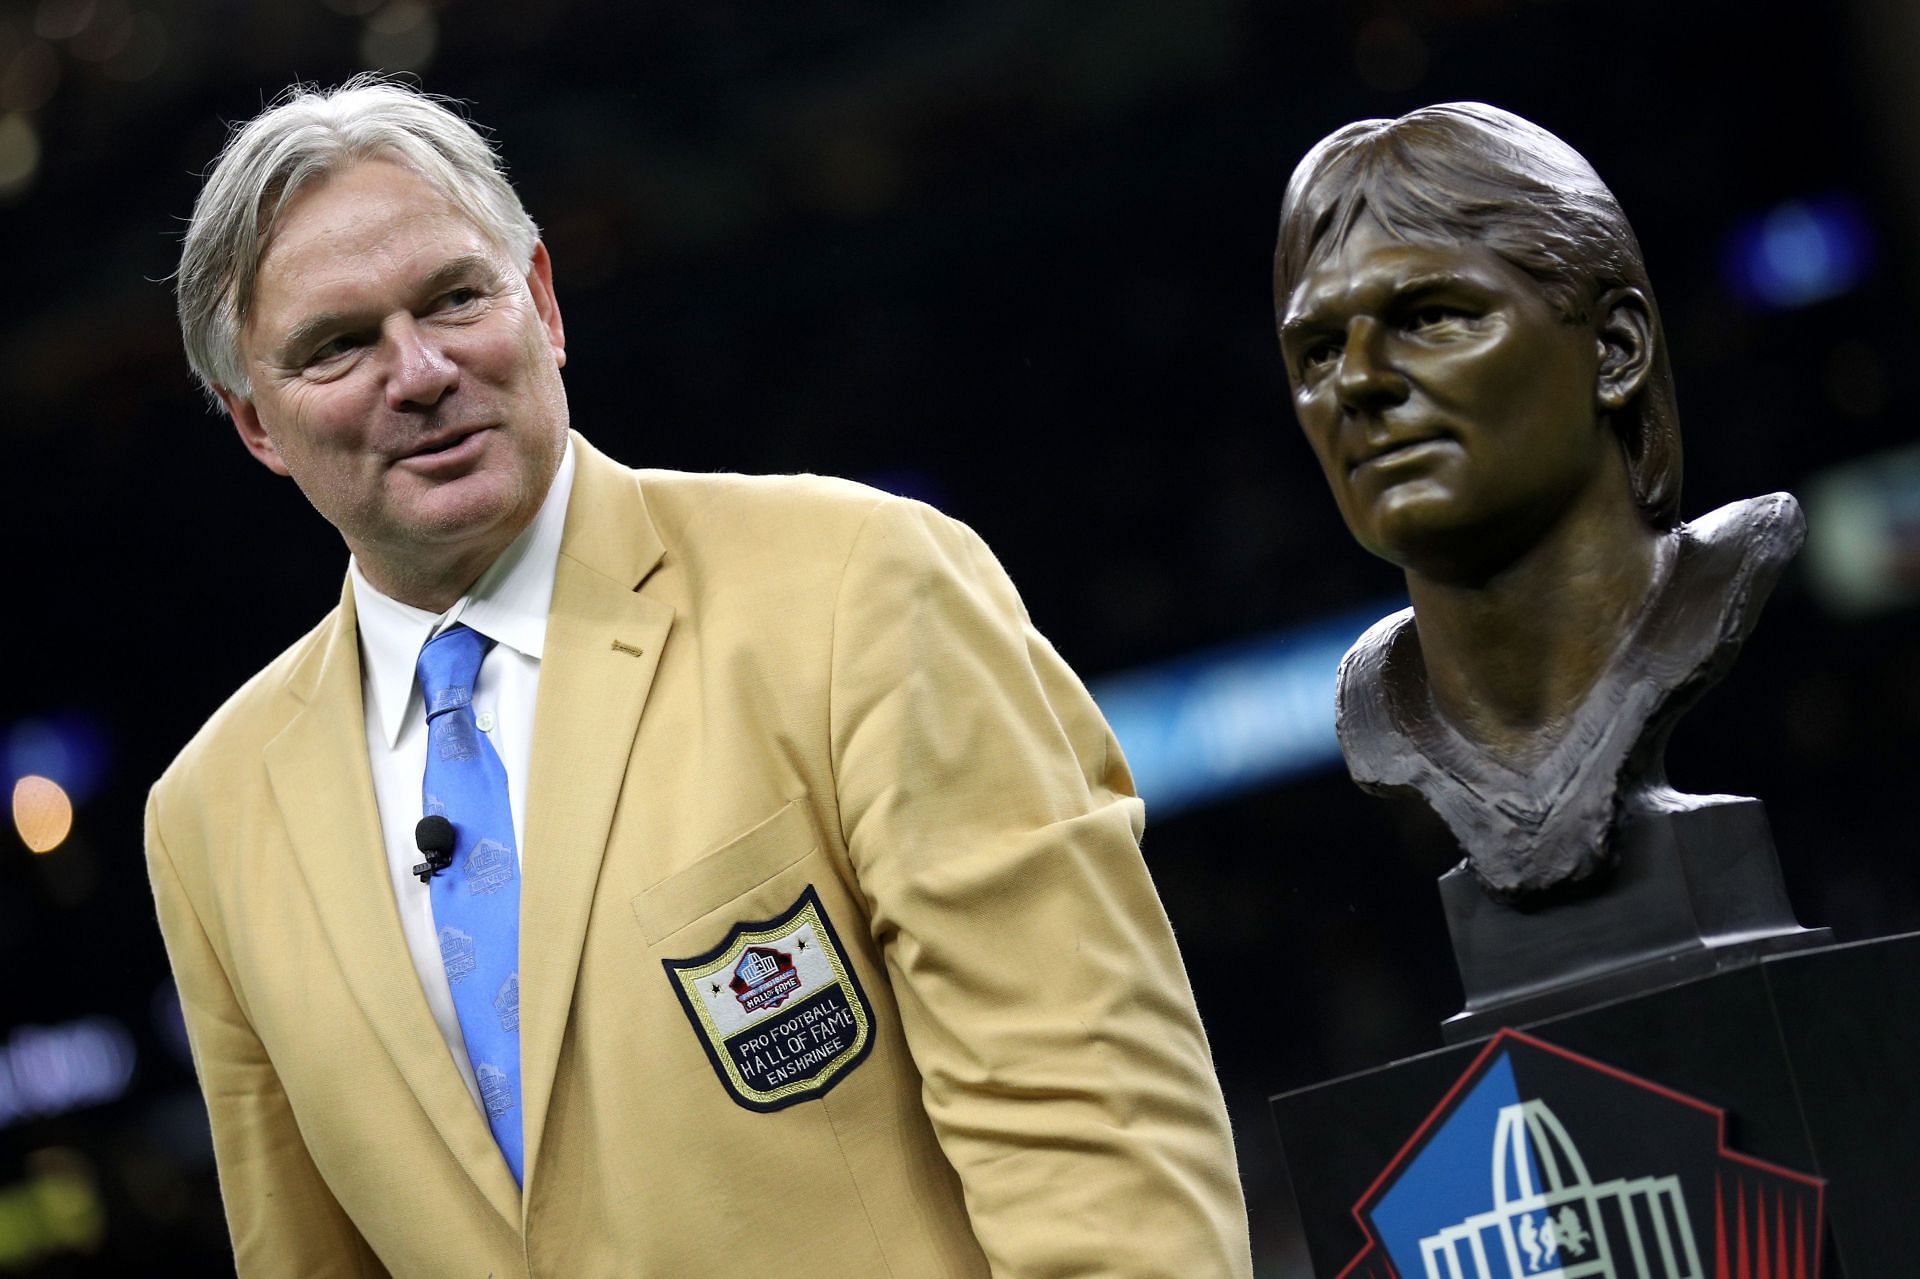 Andersen poses with his Pro Football Hall of Fame bust in 2017 (Photo: Getty)